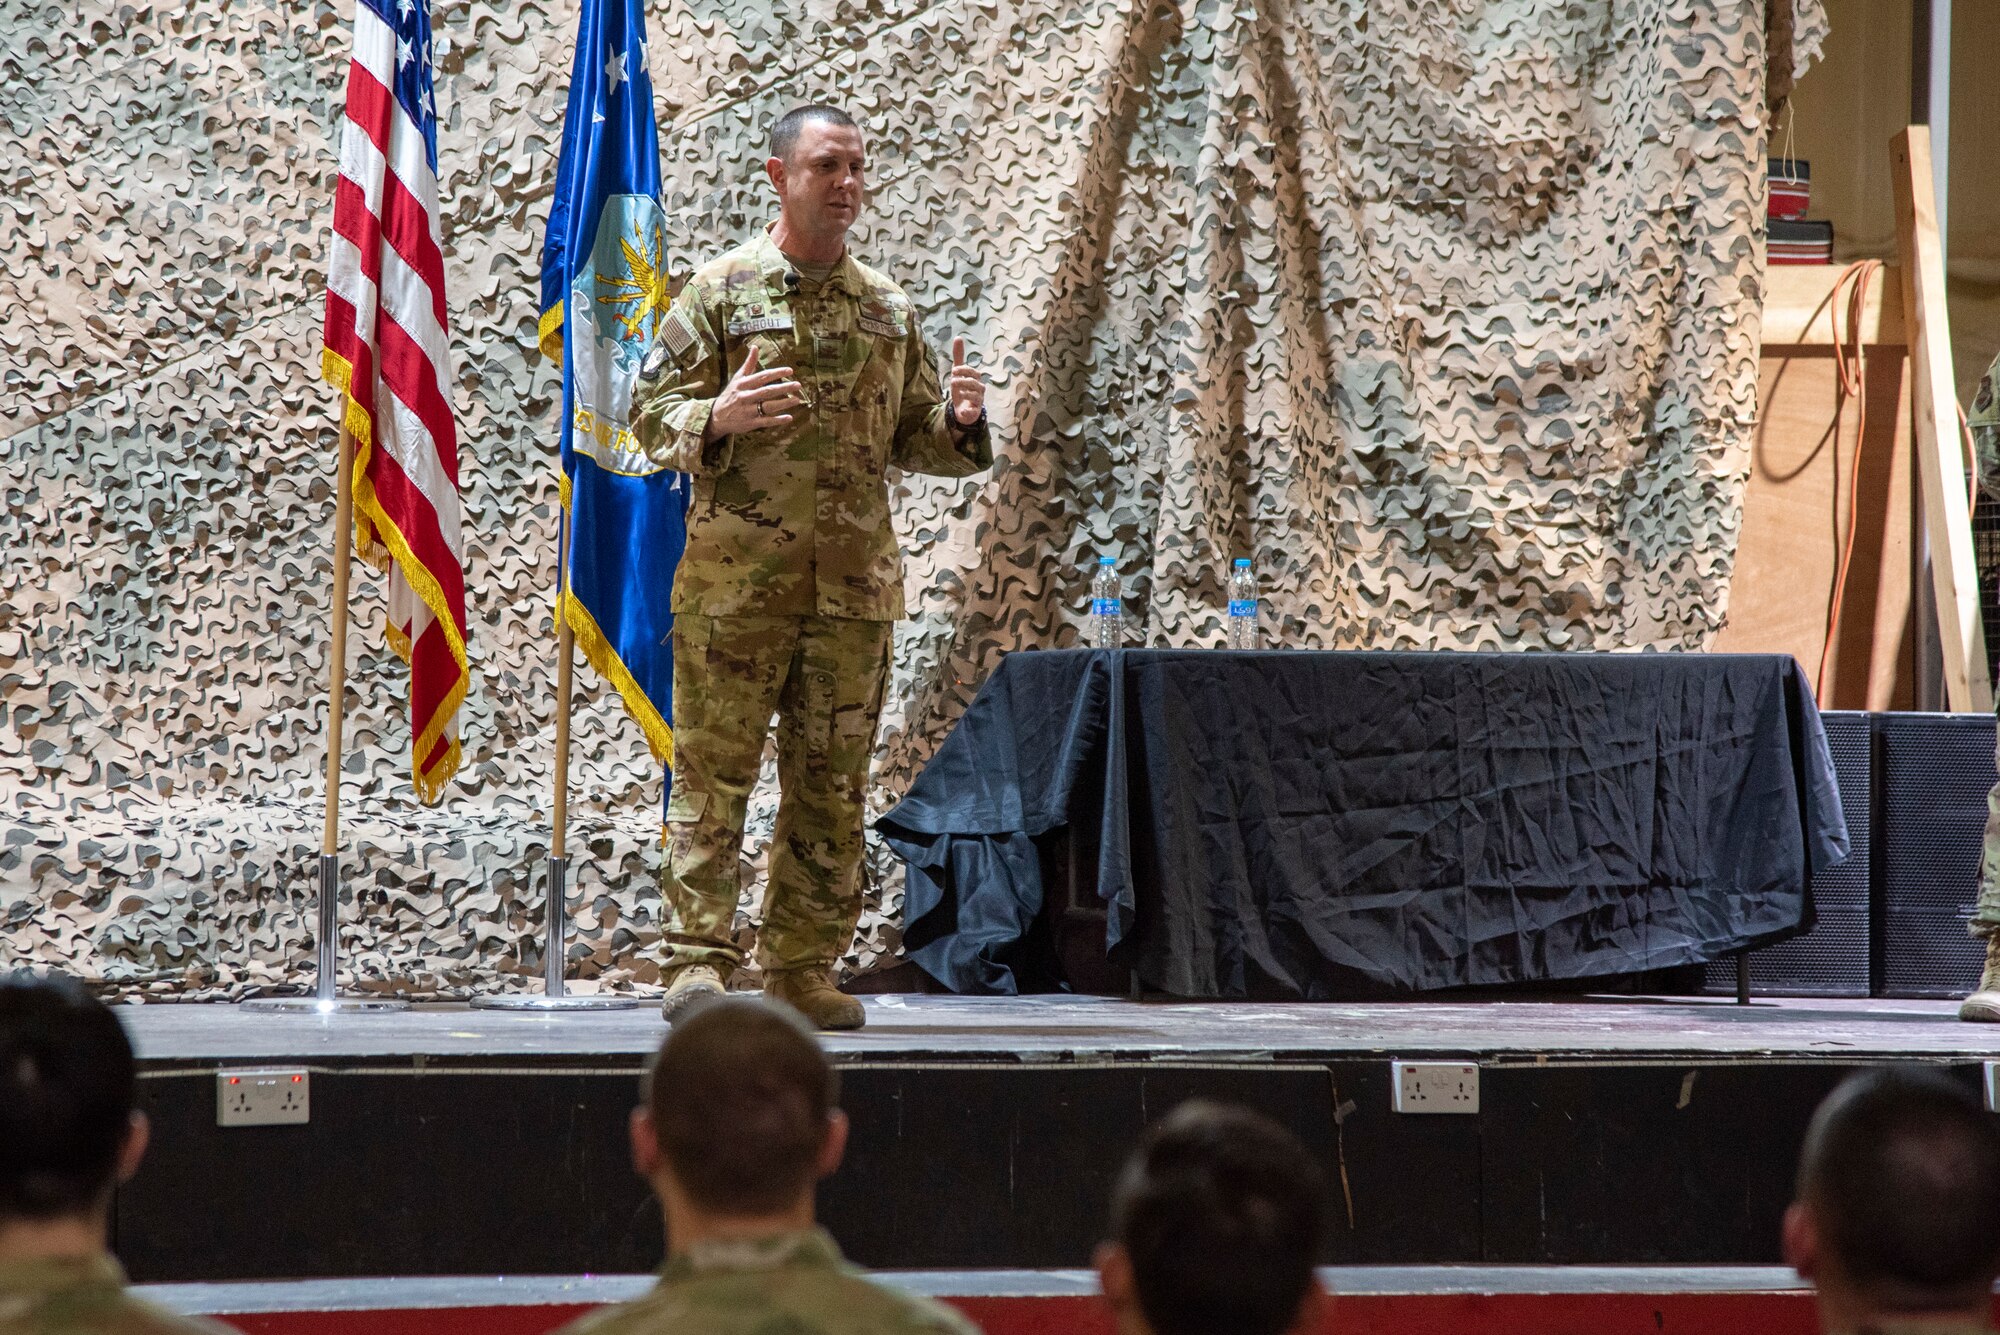 Col. Kouhout speaks at a Red Tail University graduation ceremony at an undisclosed location, Southwest Asia, Jan. 5, 2023. Red Tail University is an Airman-led education organization that teaches developing Airmen about leadership and quality-of-life topics. (U.S. Air Force photo by: Tech. Sgt. Jim Bentley)